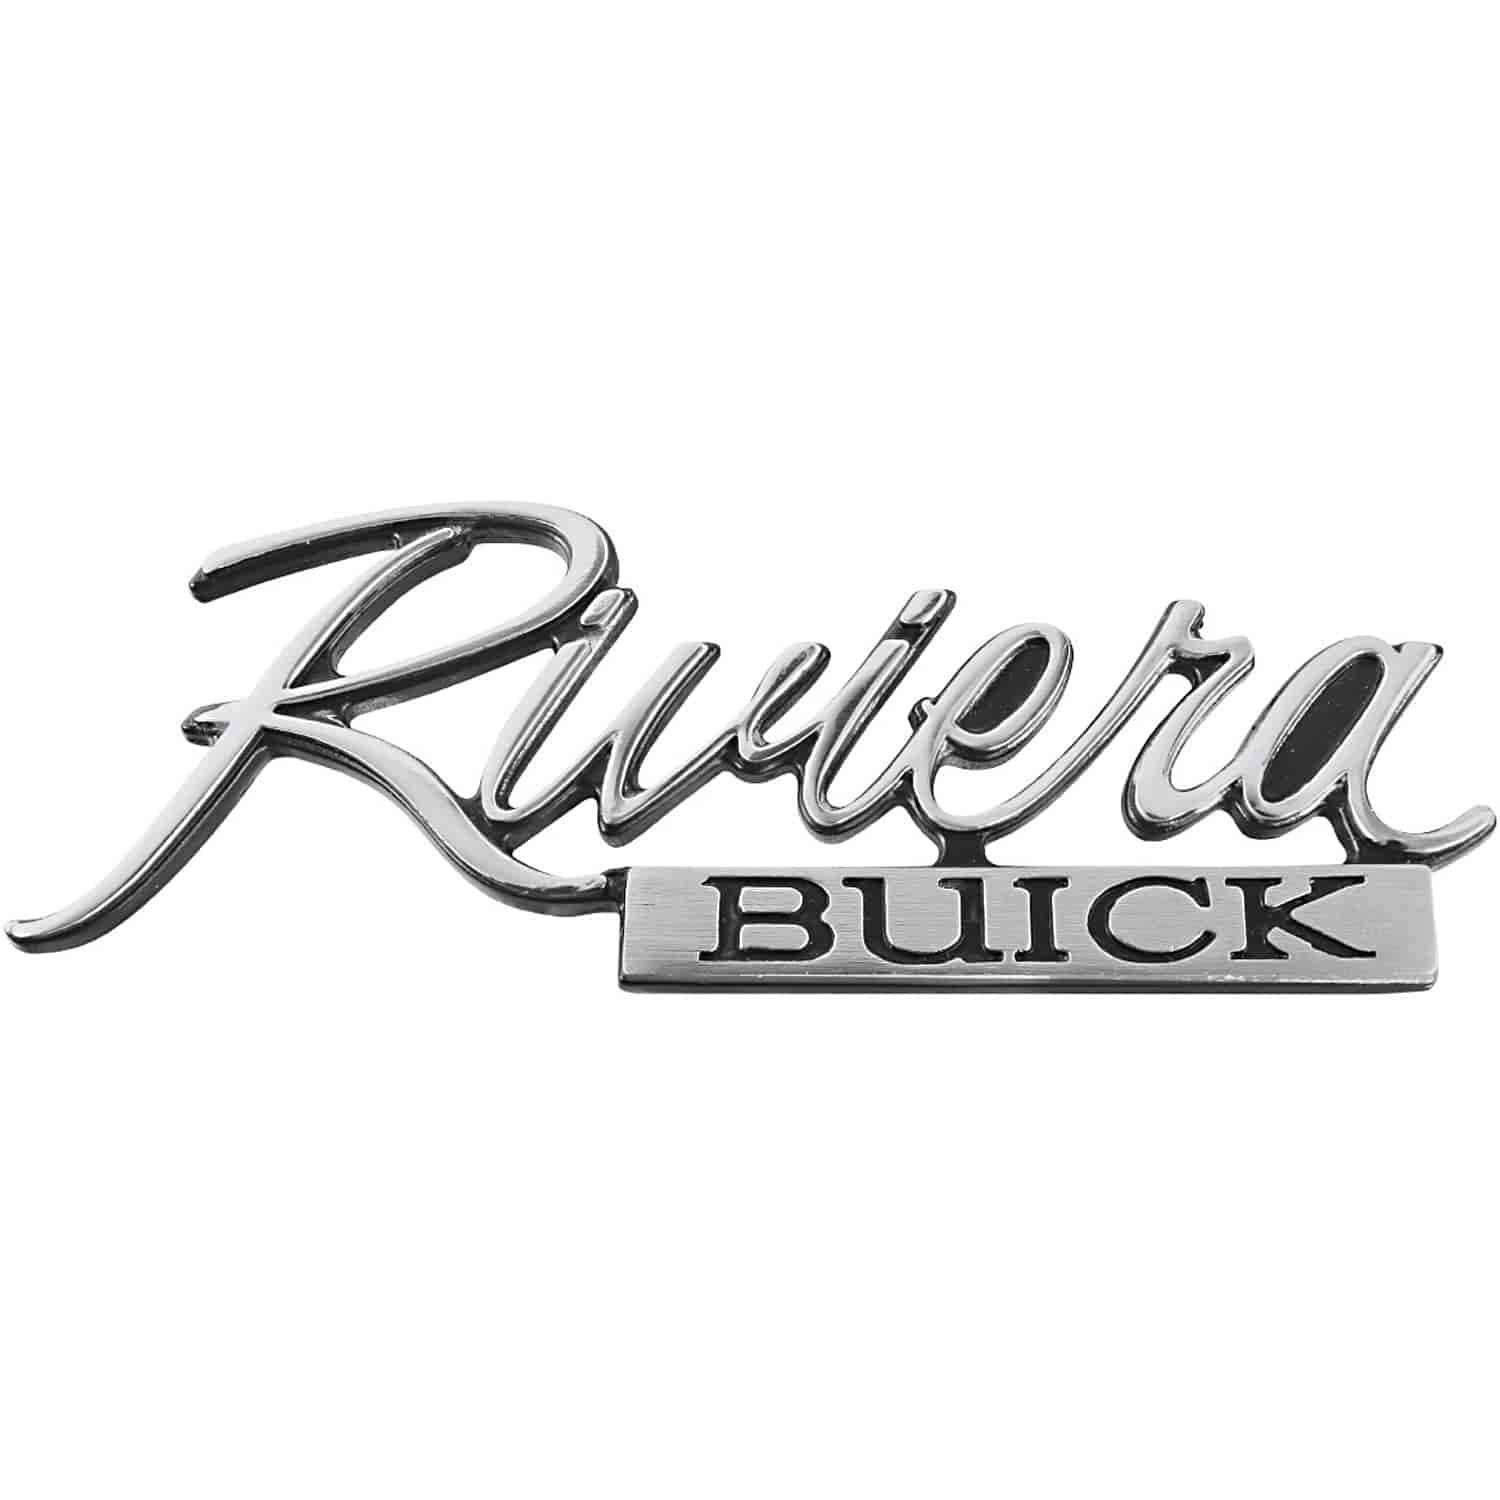 Emblem Trunk 1973 Riviera by Buick